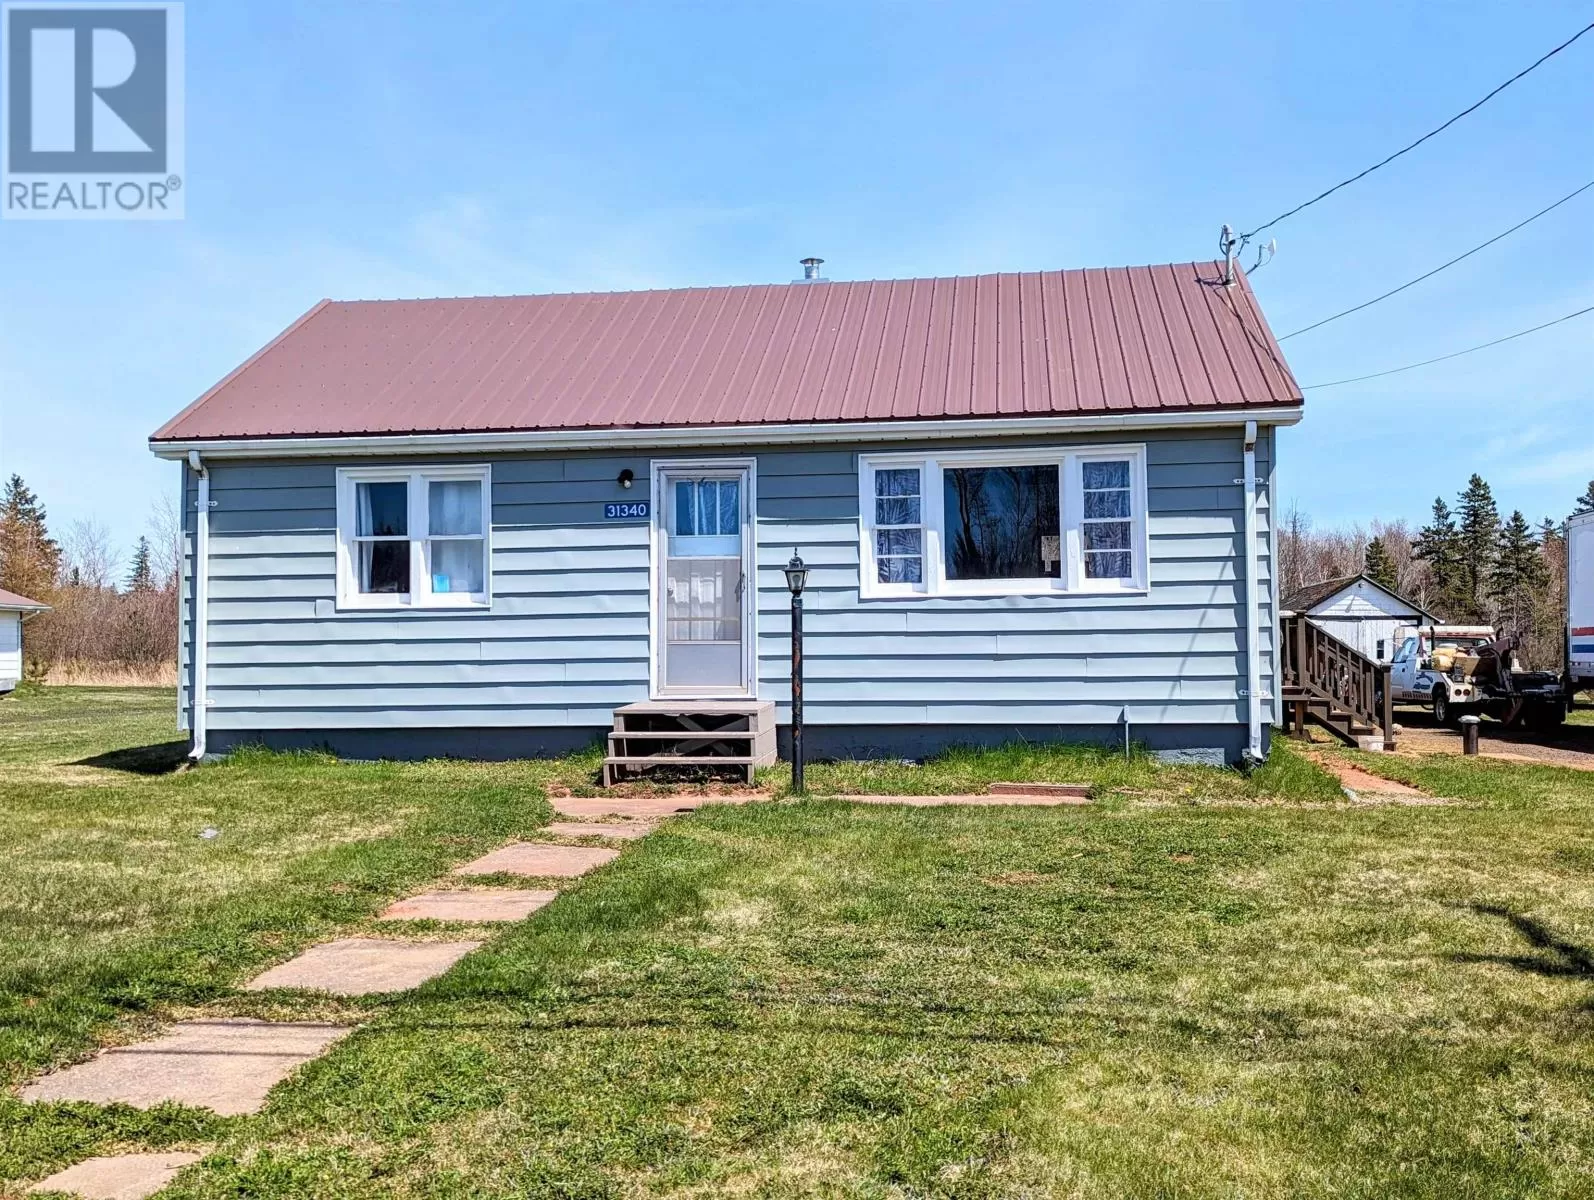 House for rent: 31340 Western Road|31340 Route 2, Richmond, Richmond, Prince Edward Island C0B 1T0